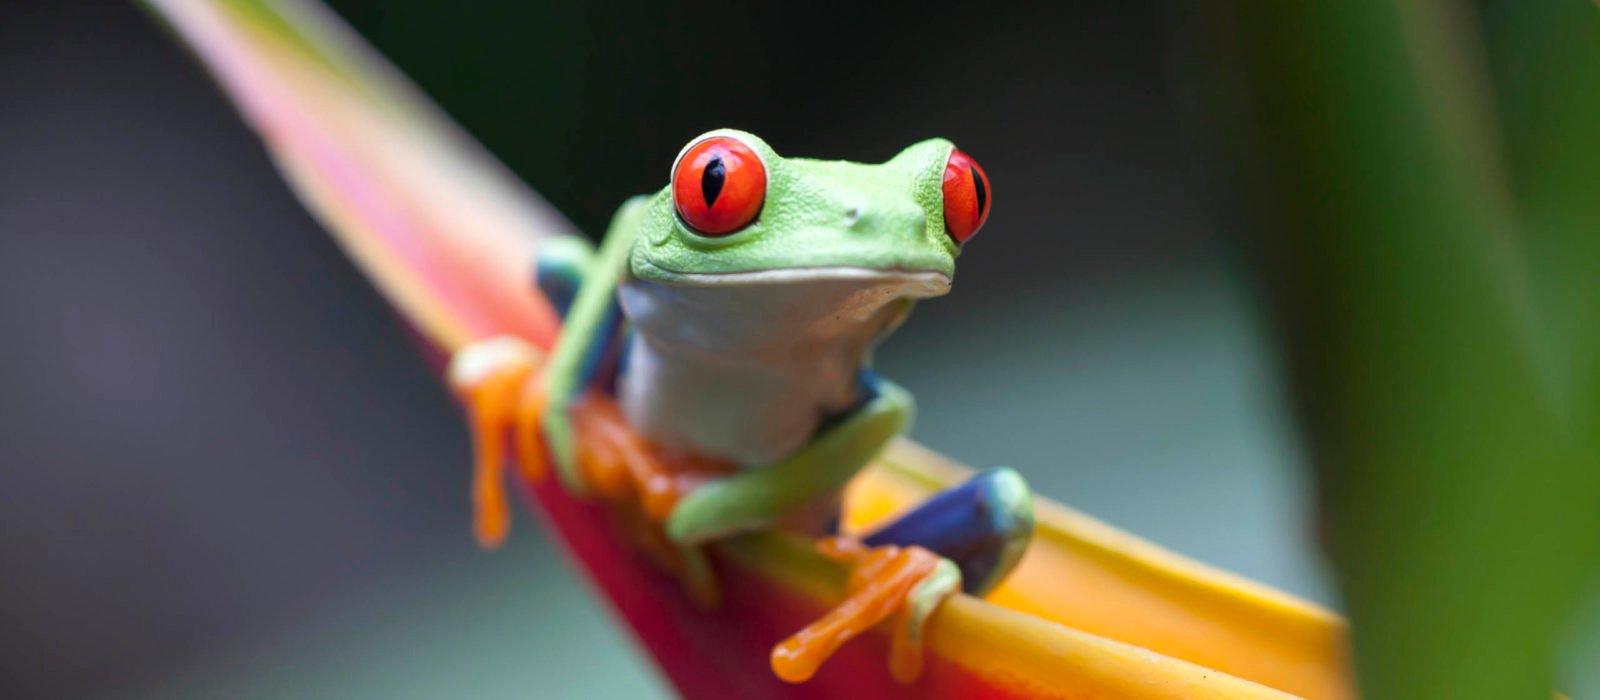 RED EYED FROG, COSTA RICA WILD LIFE